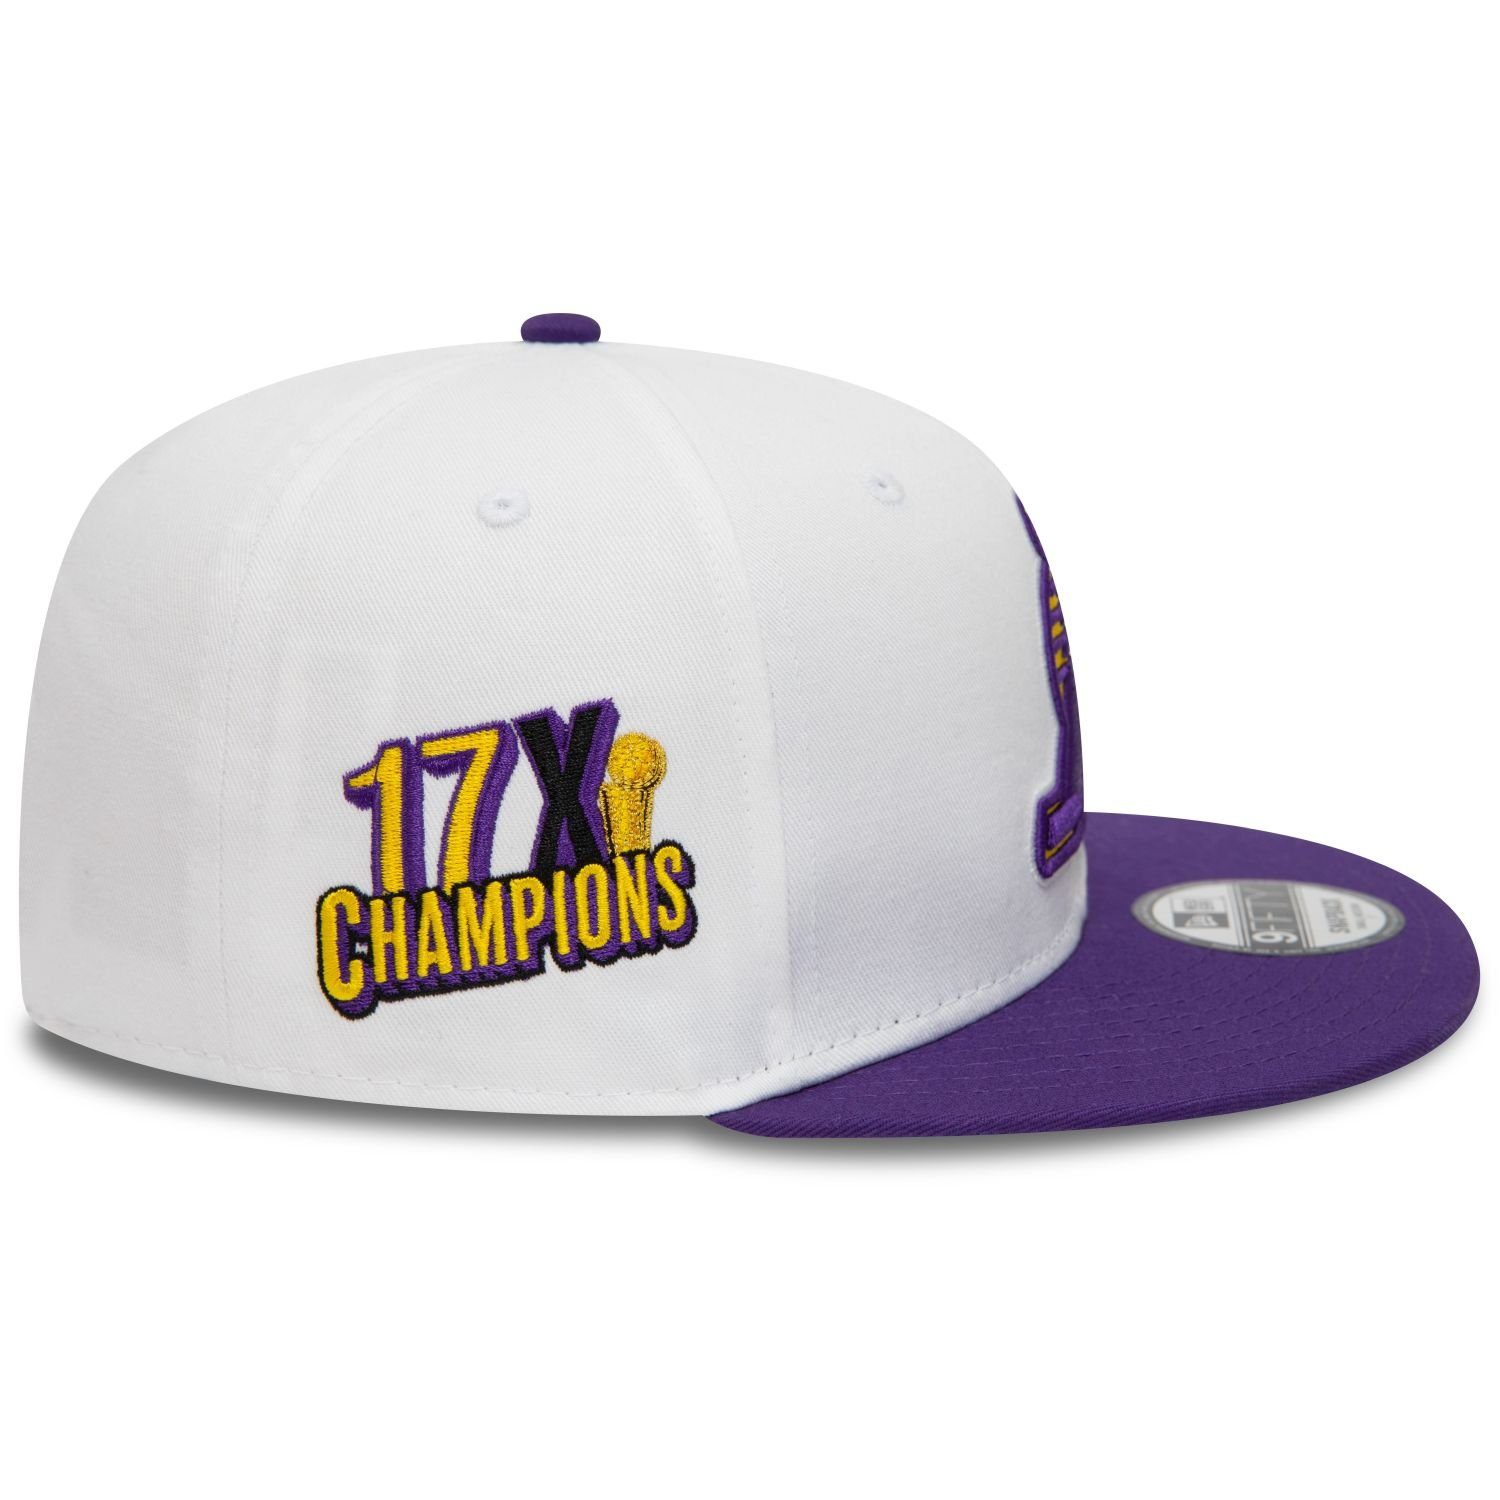 Era New PATCH Angeles Lakers Los Snapback SIDE Cap 9Fifty